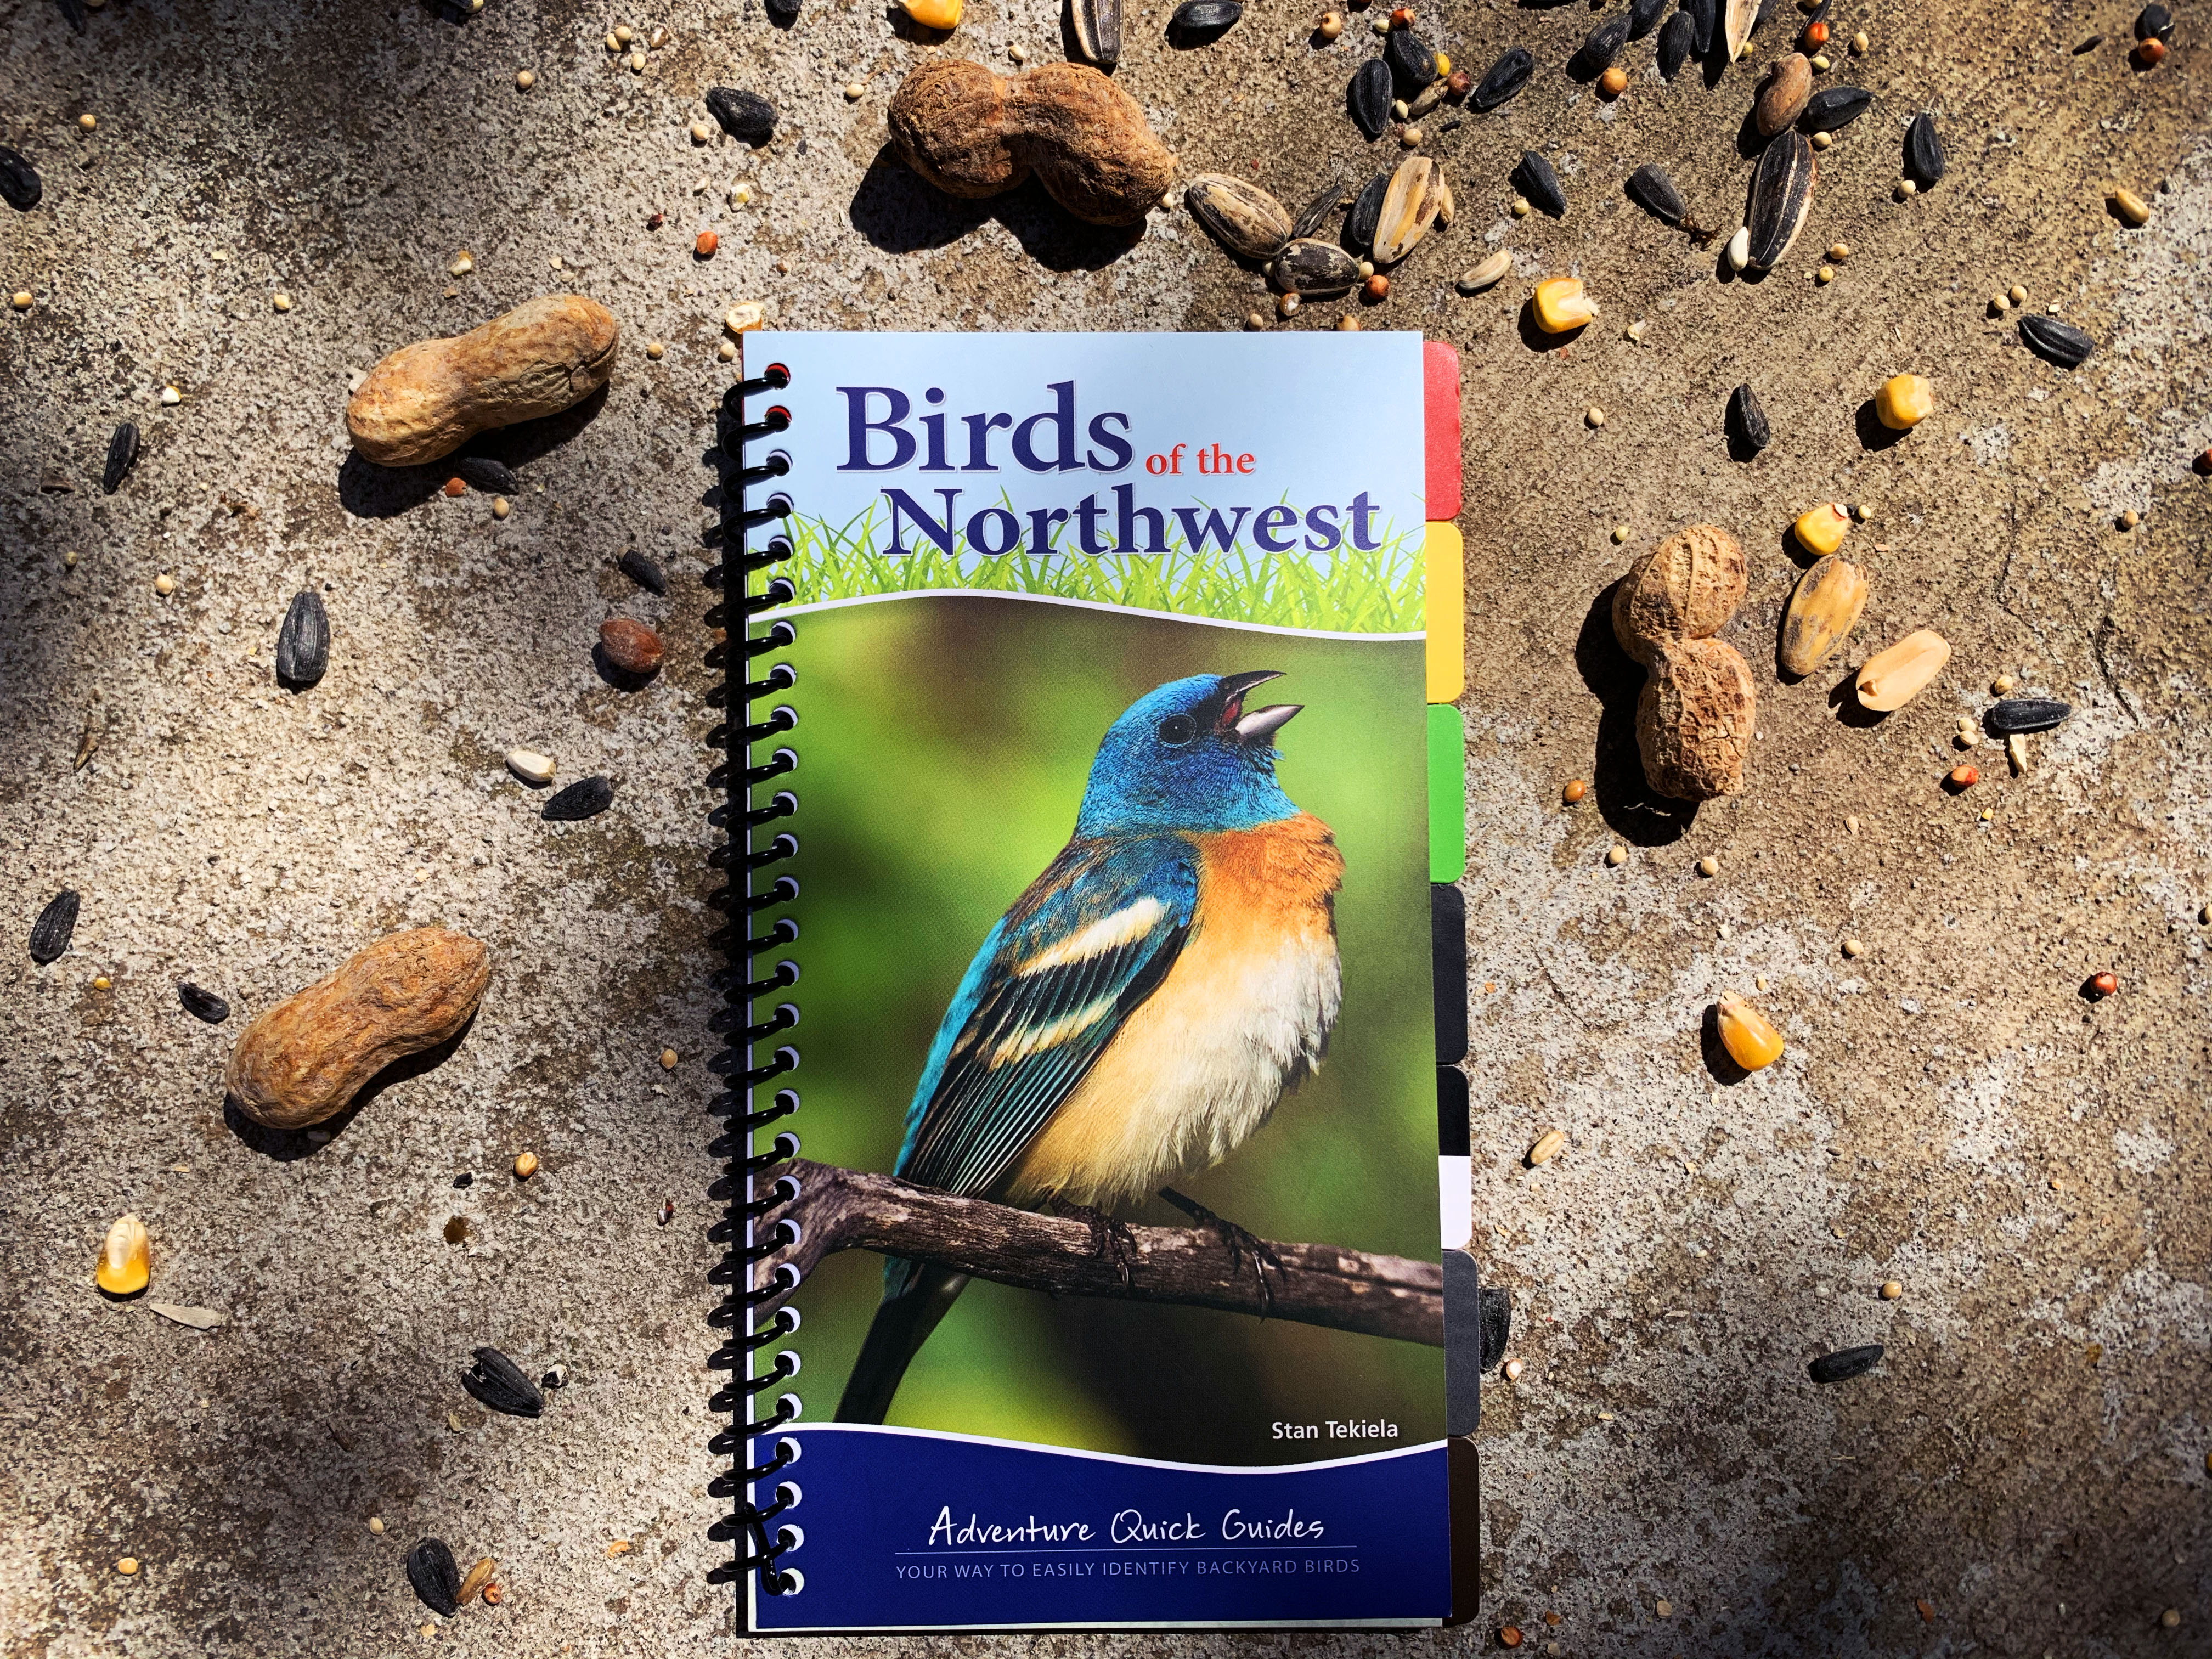 Review: “Birds of the Northwest”